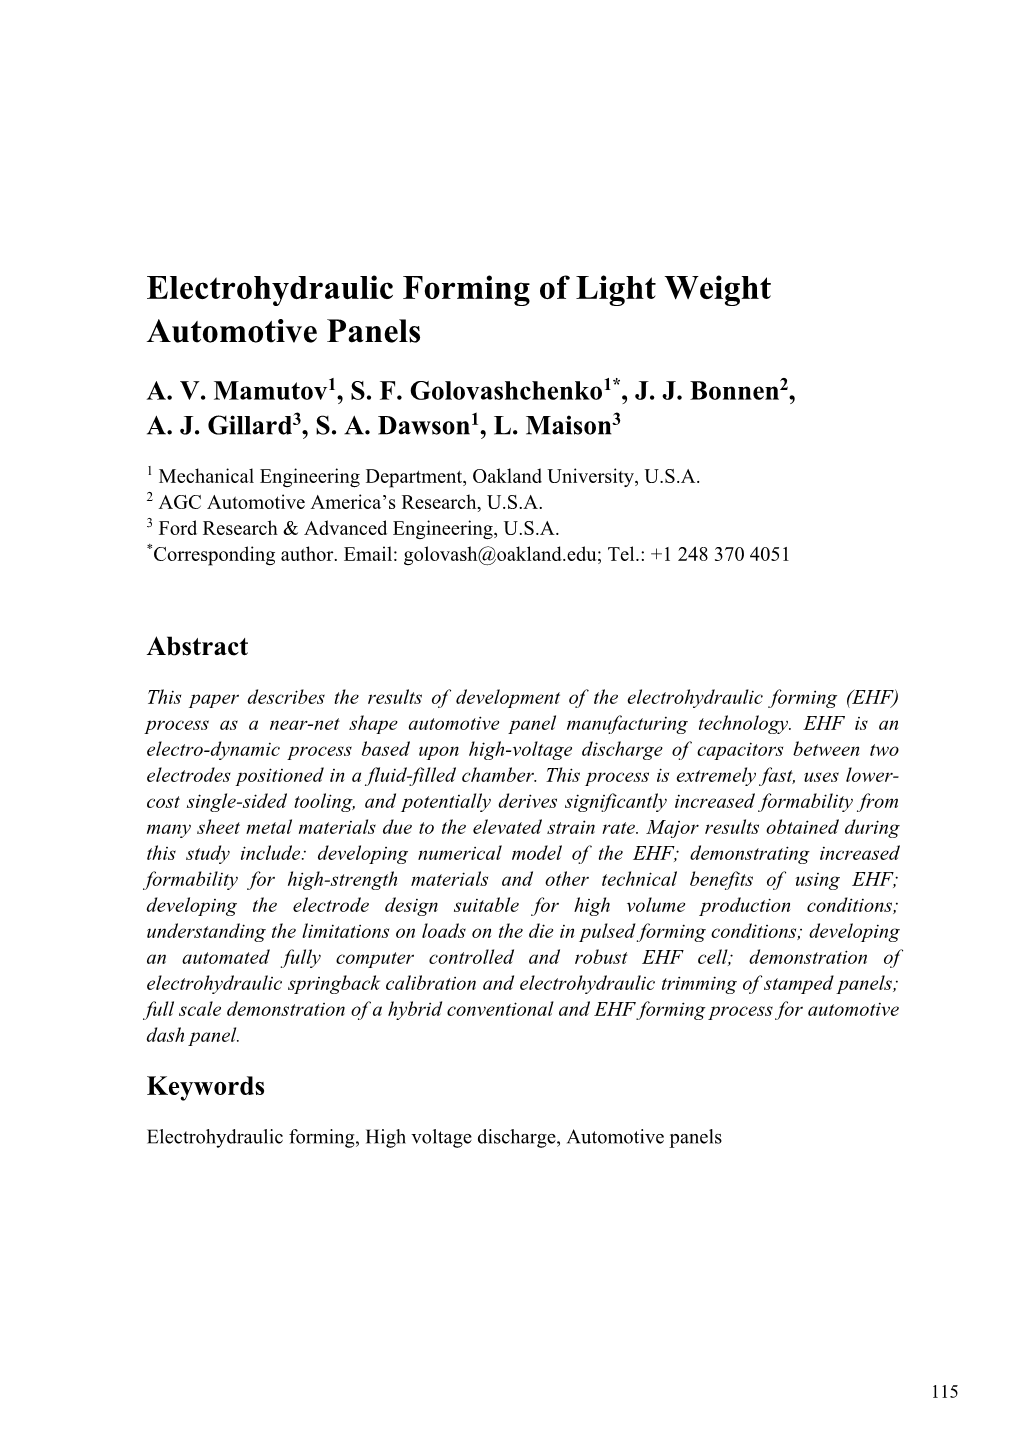 Electrohydraulic Forming of Light Weight Automotive Panels